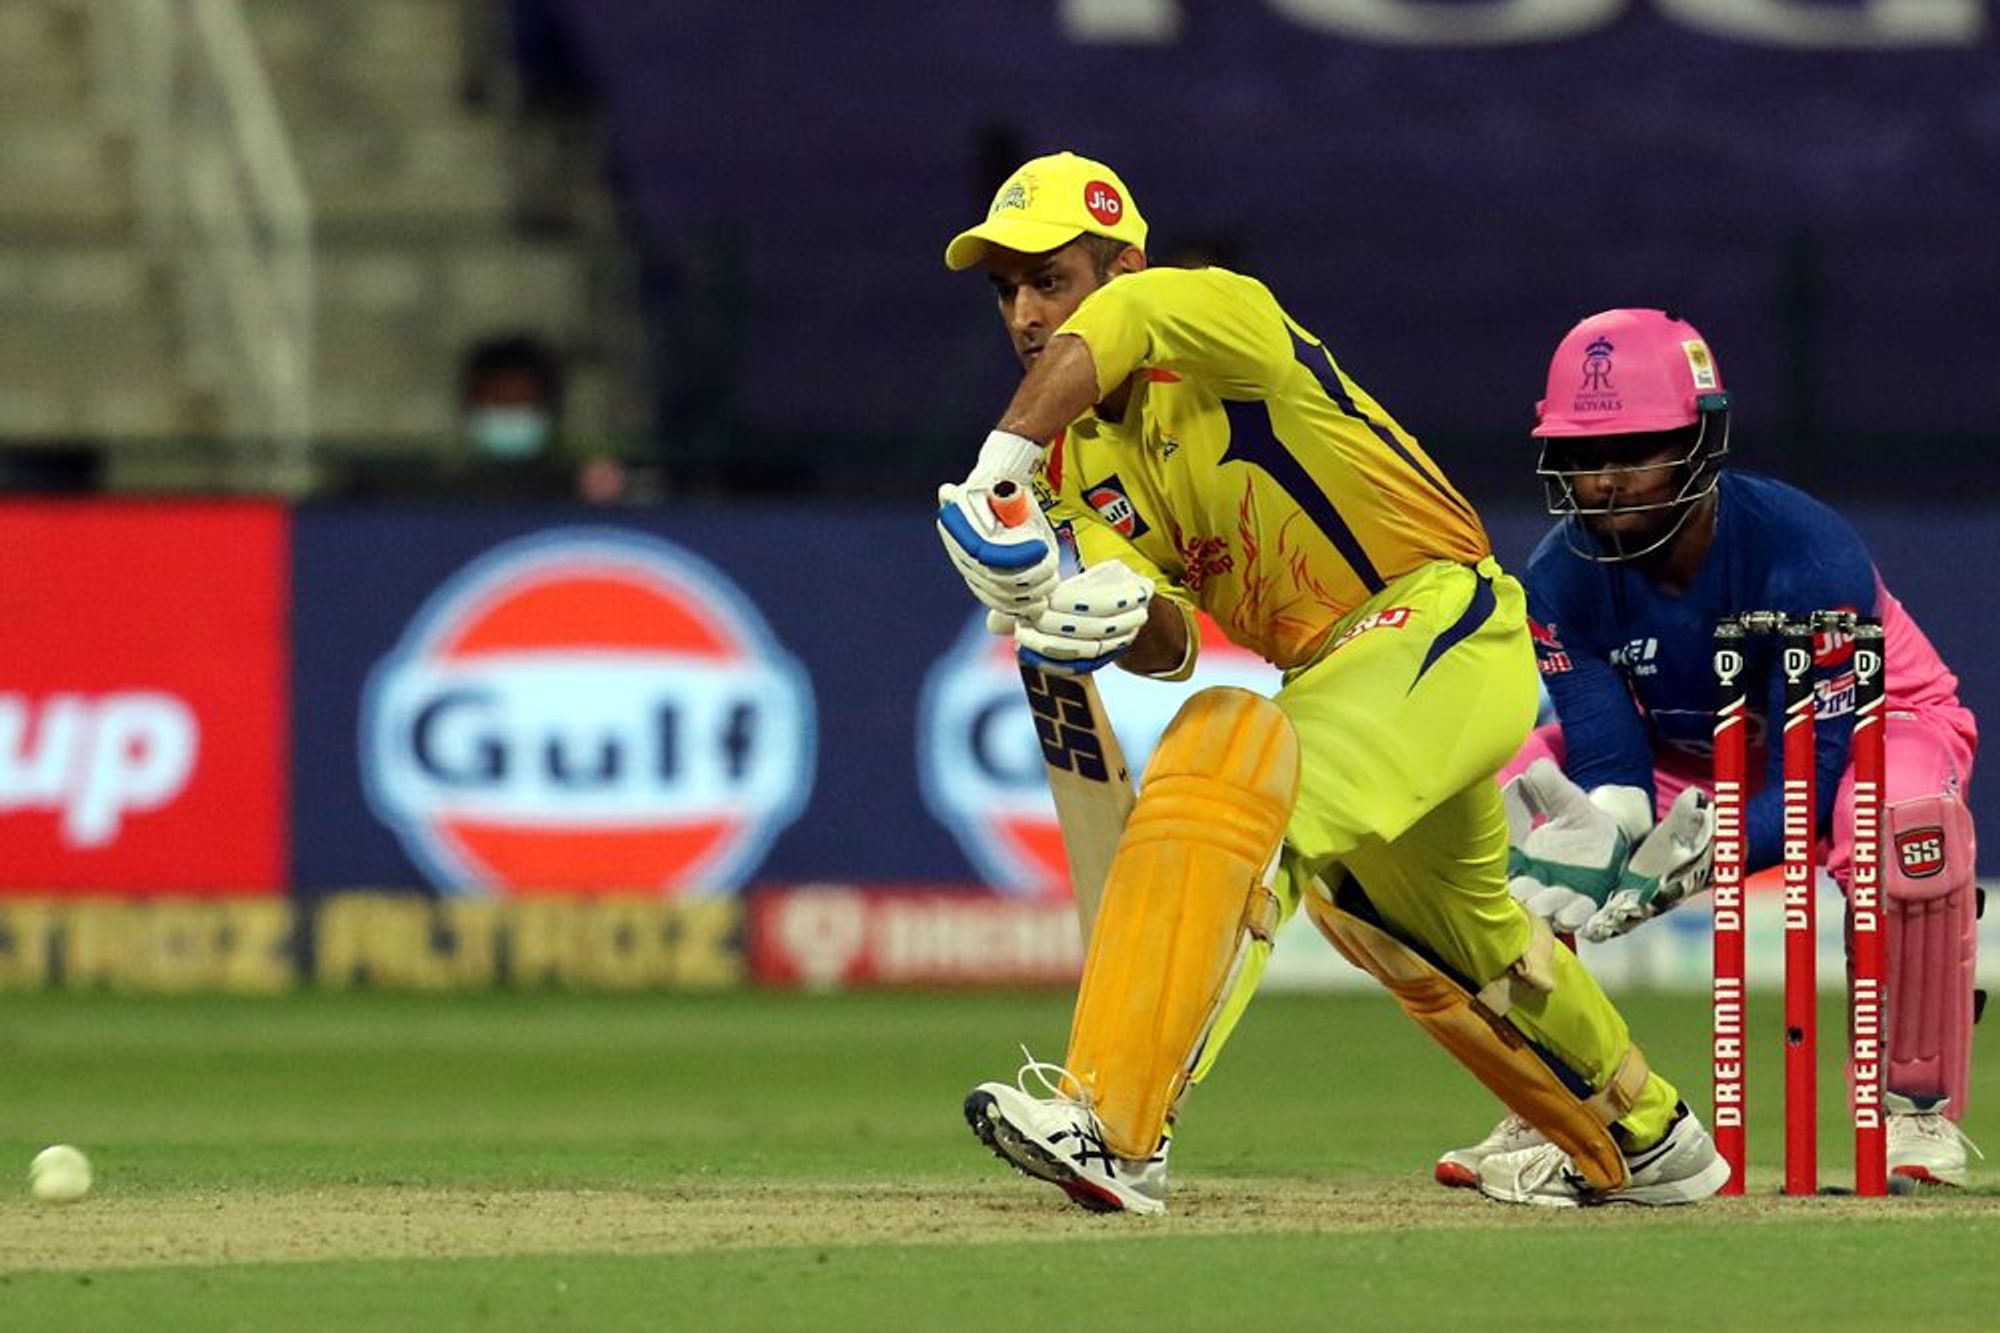 MS Dhoni has not been at his aggressive best in IPL 2020 | BCCI/IPL